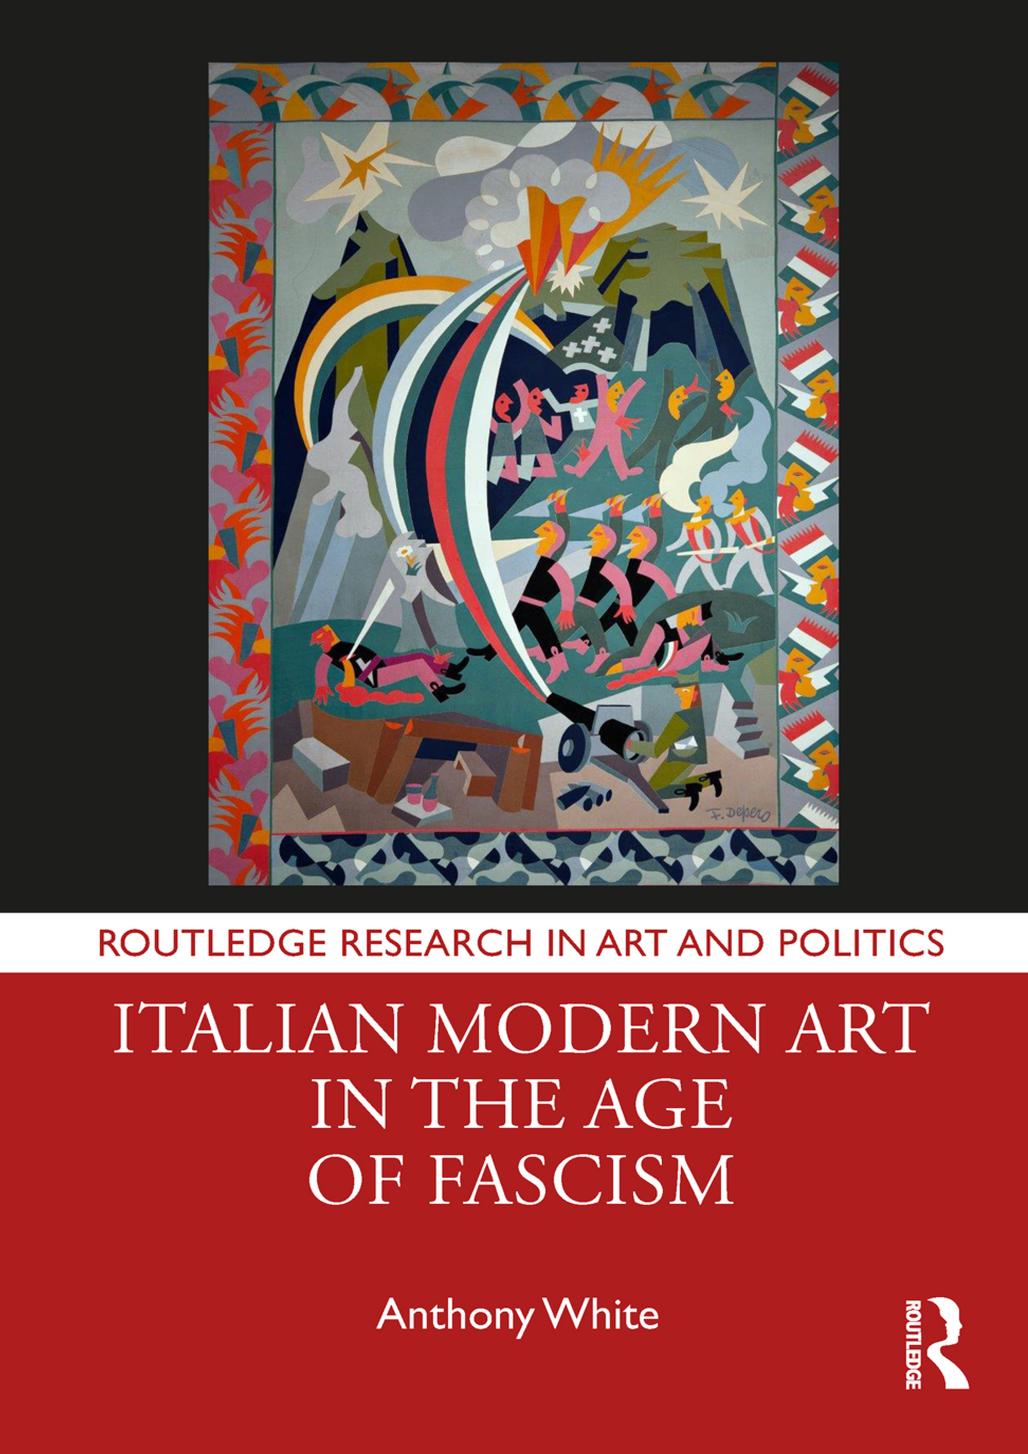 Italian Modern Art in the Age of Fascism by Anthony White